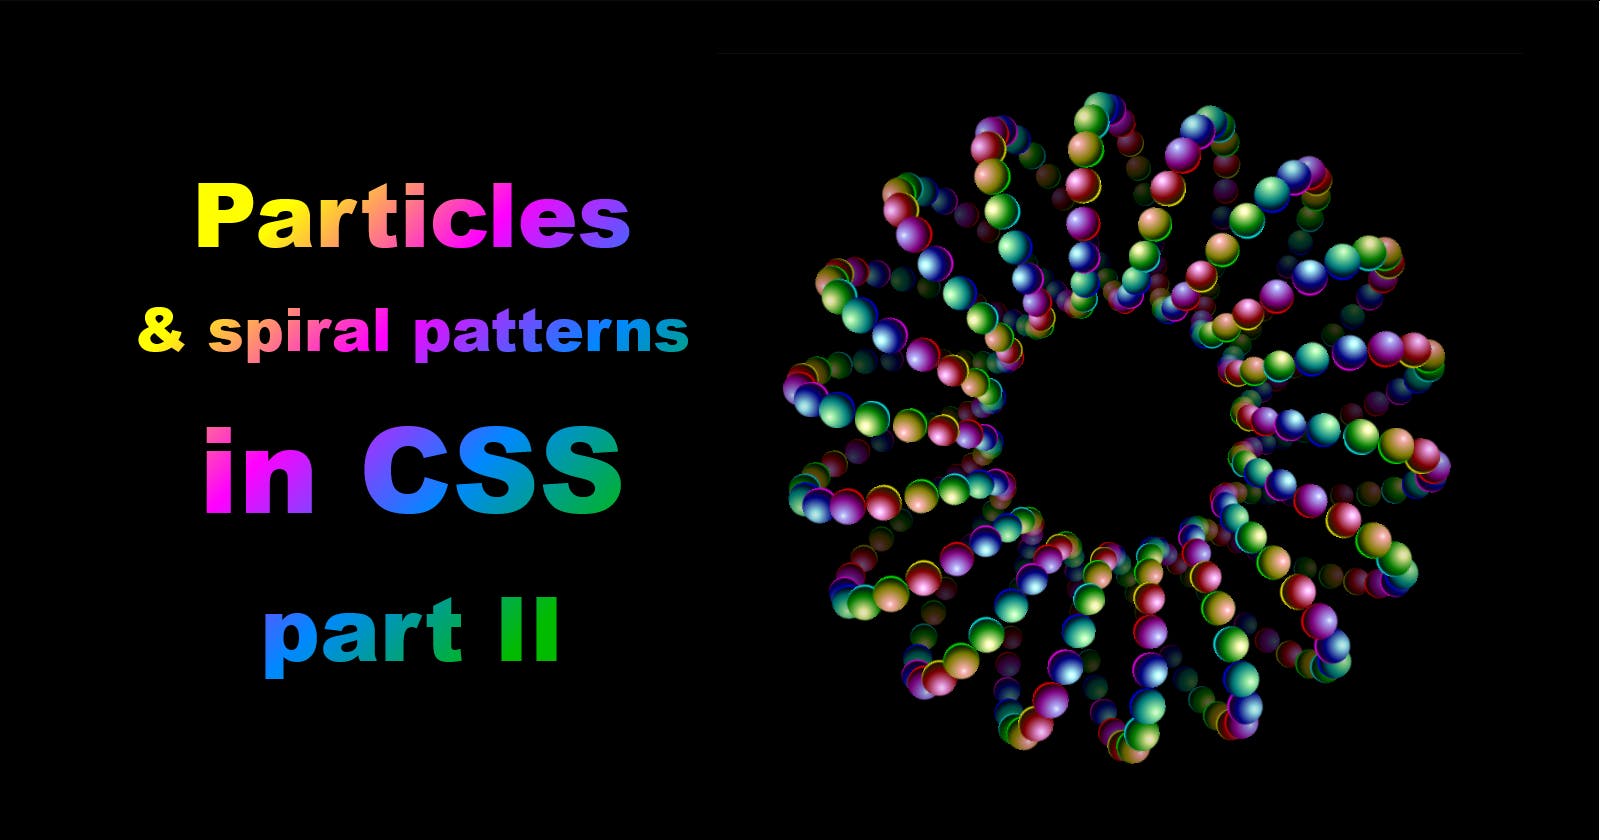 Particles & spiral patterns in CSS: part II